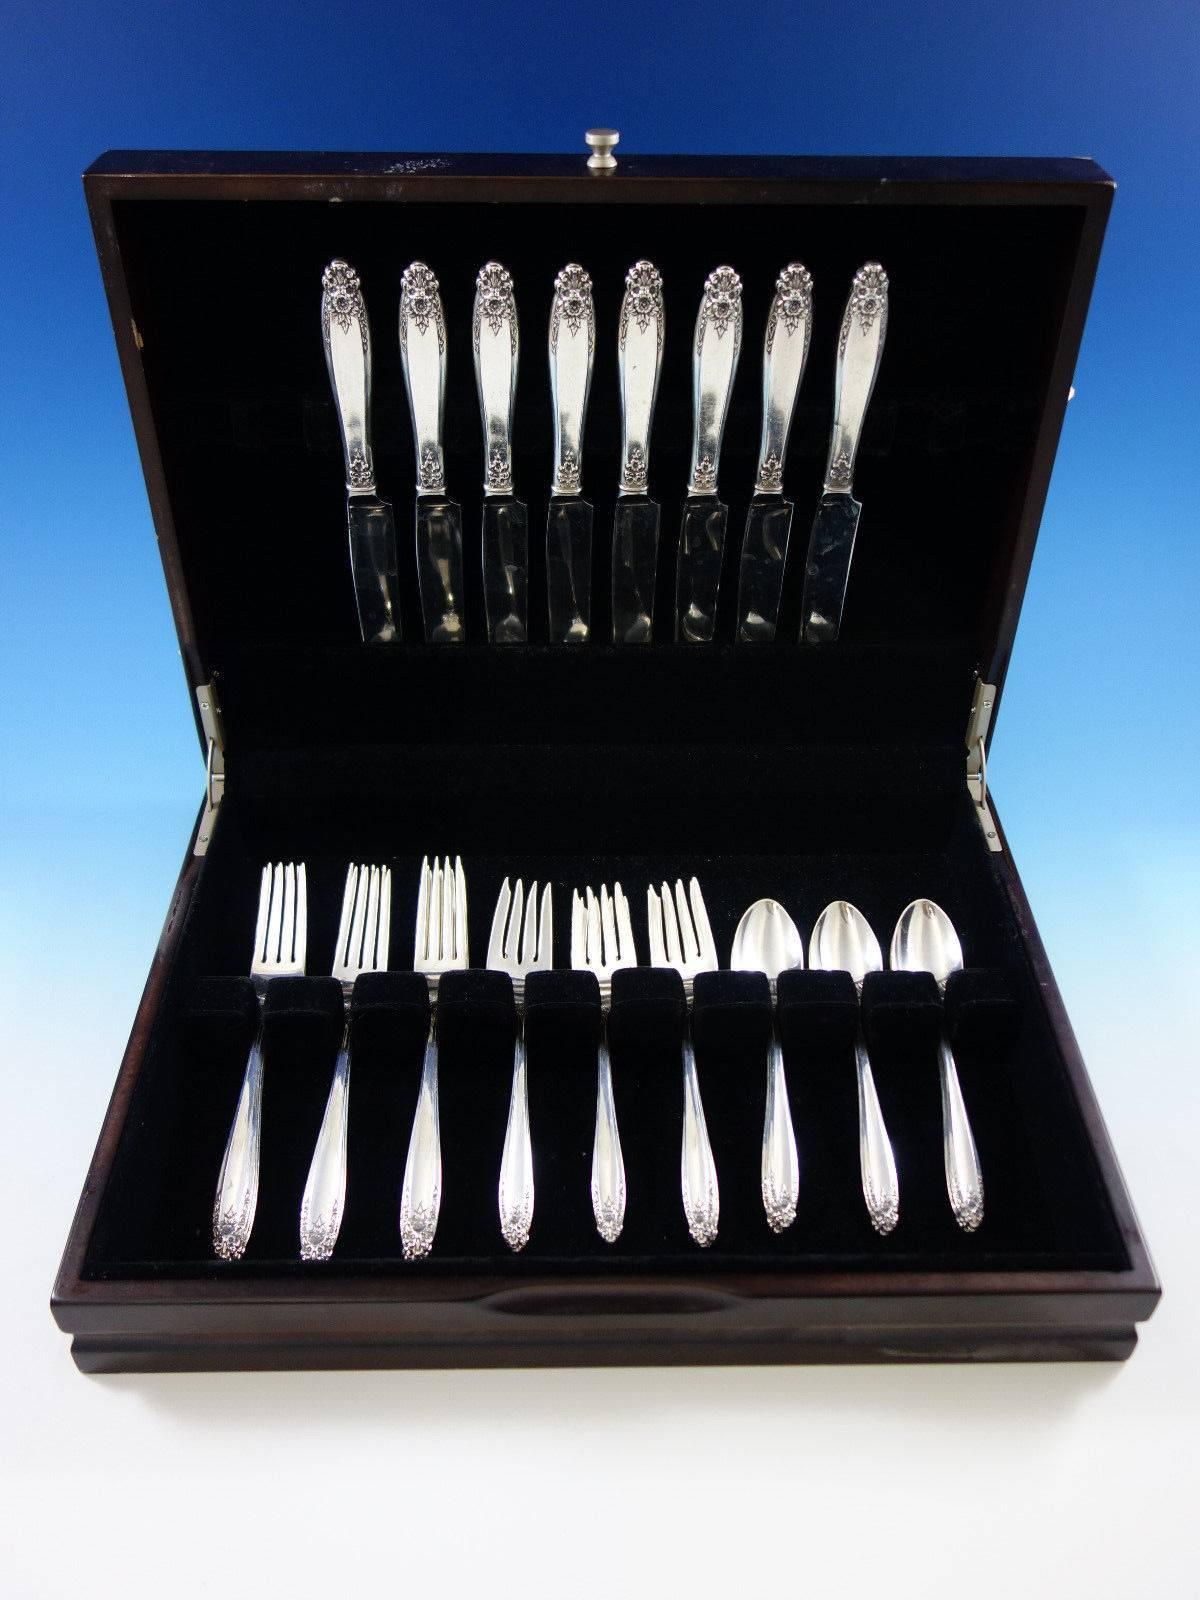 Prelude by international sterling silver flatware set, 32 pieces. This set includes:
 
eight knives, 9